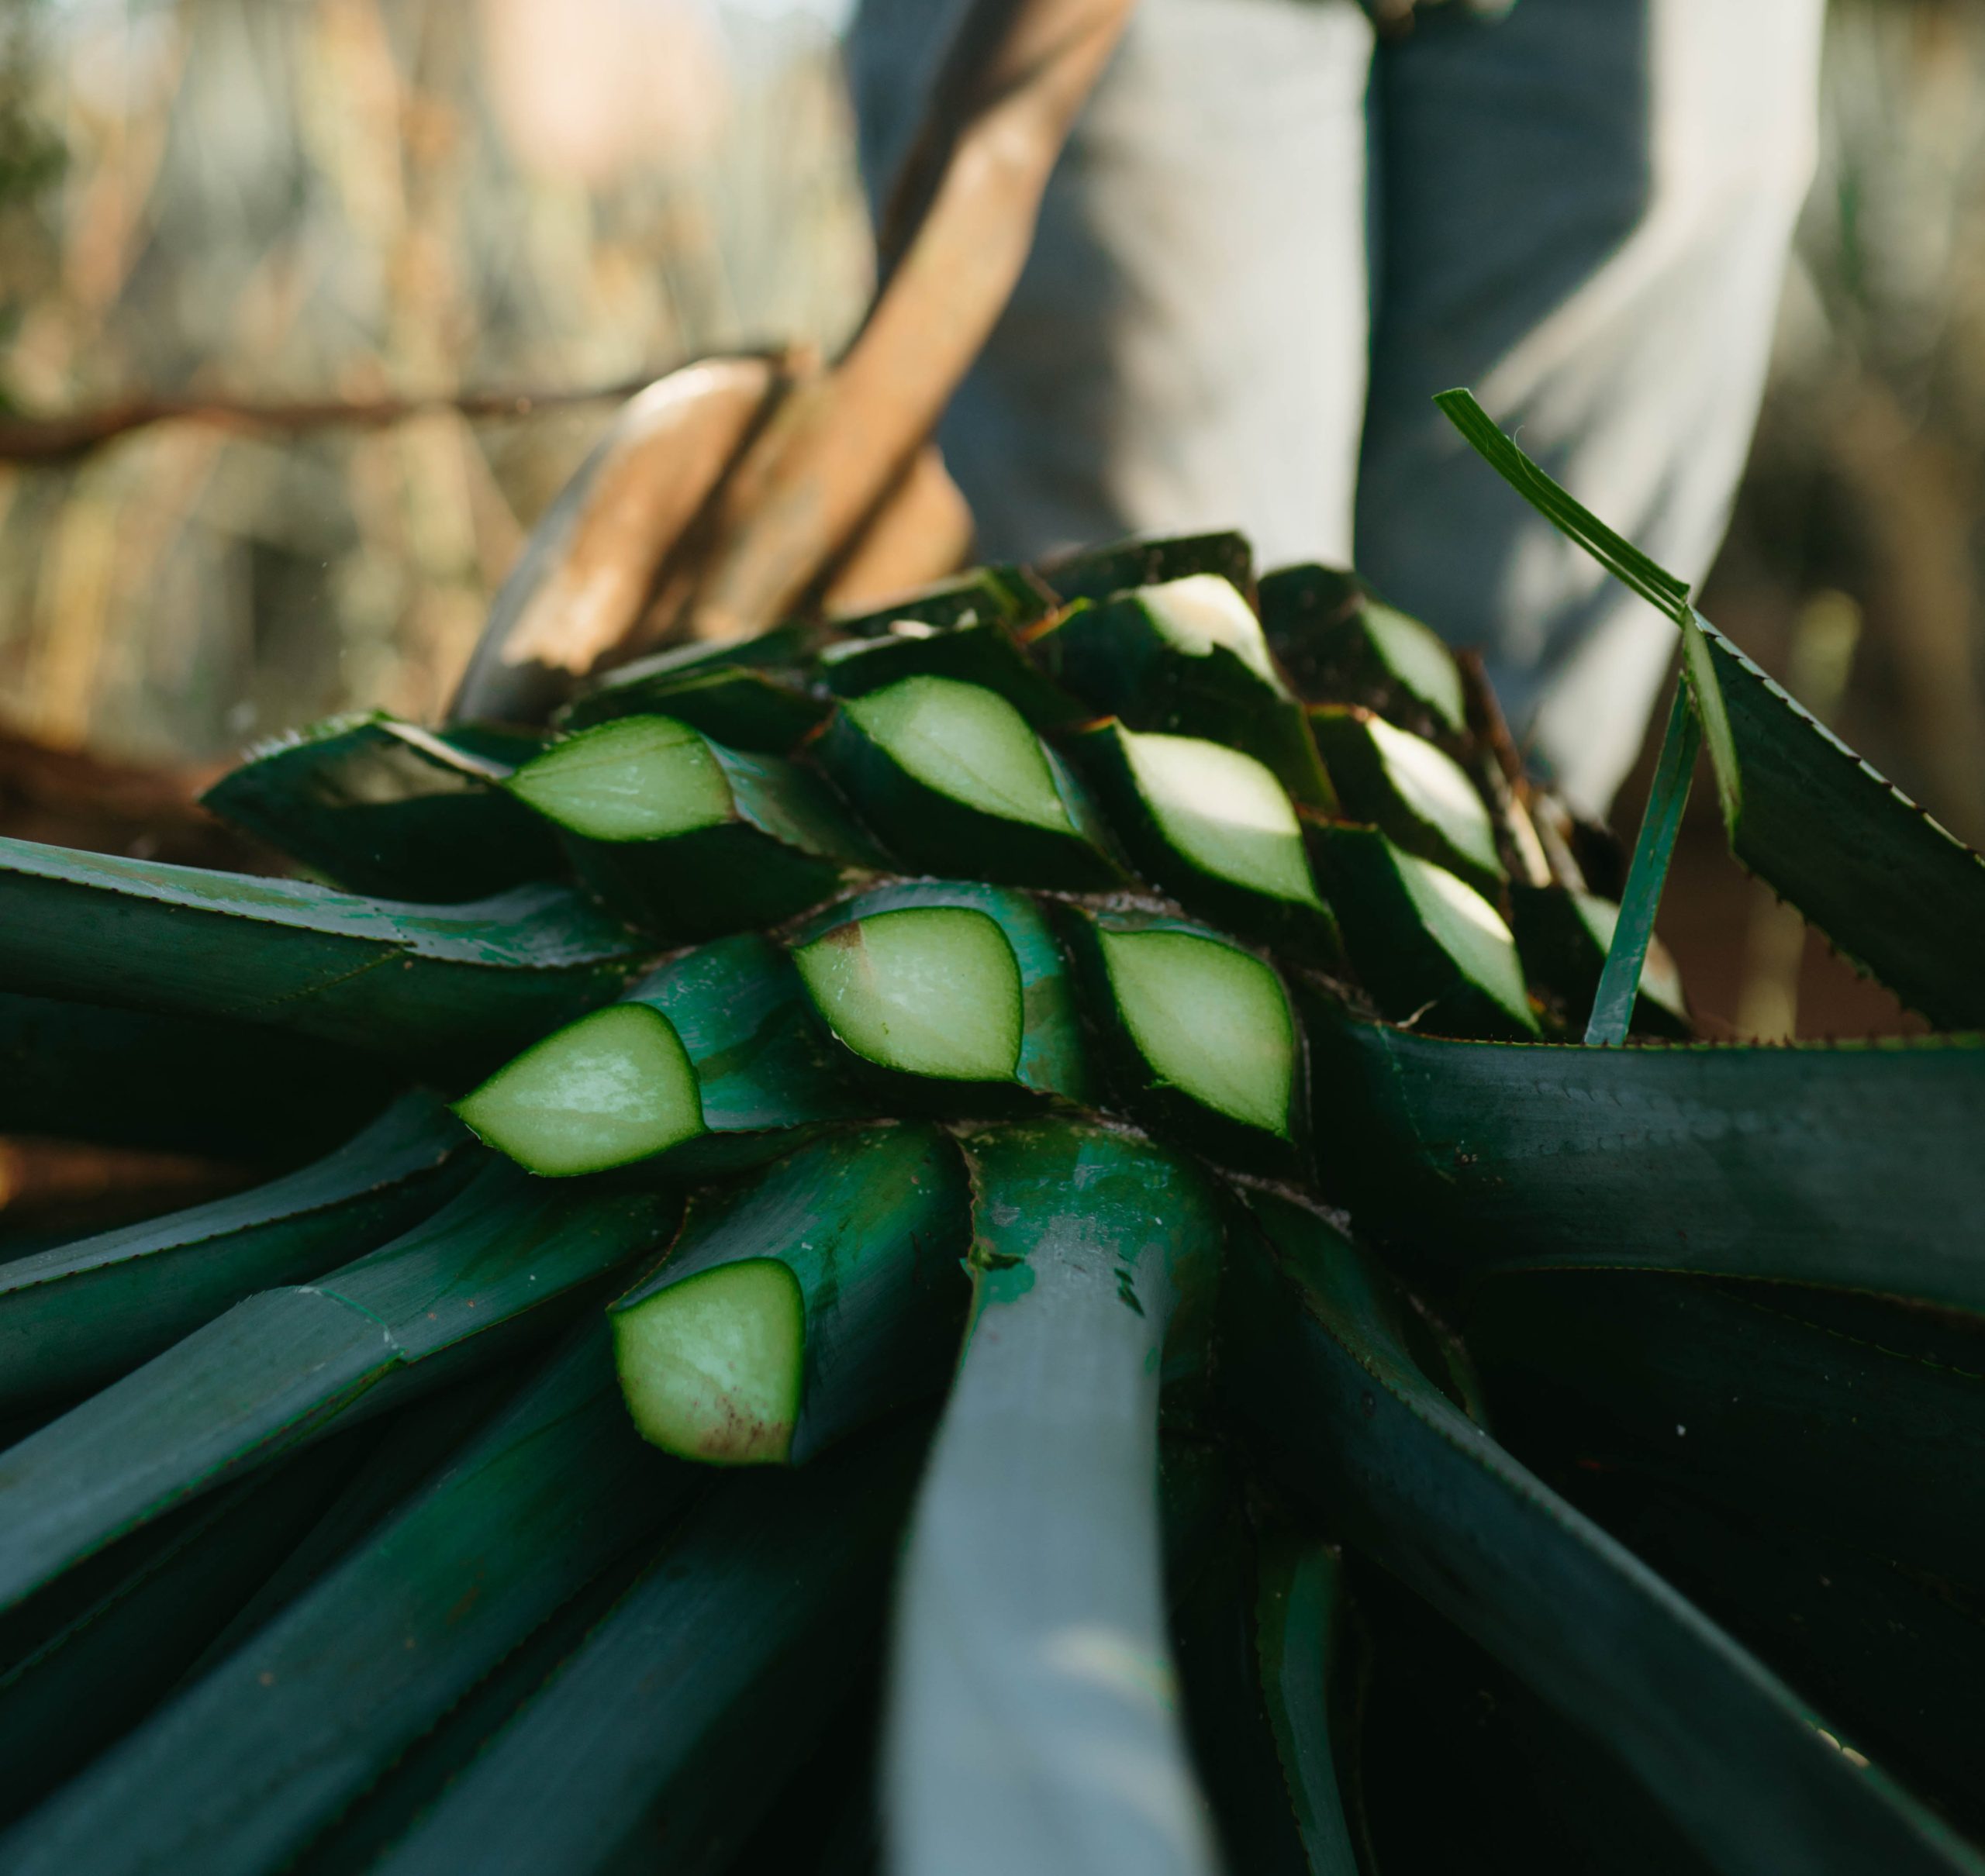 Agave Nectar - 19 Foods We Thought Were Healthy, But Aren't